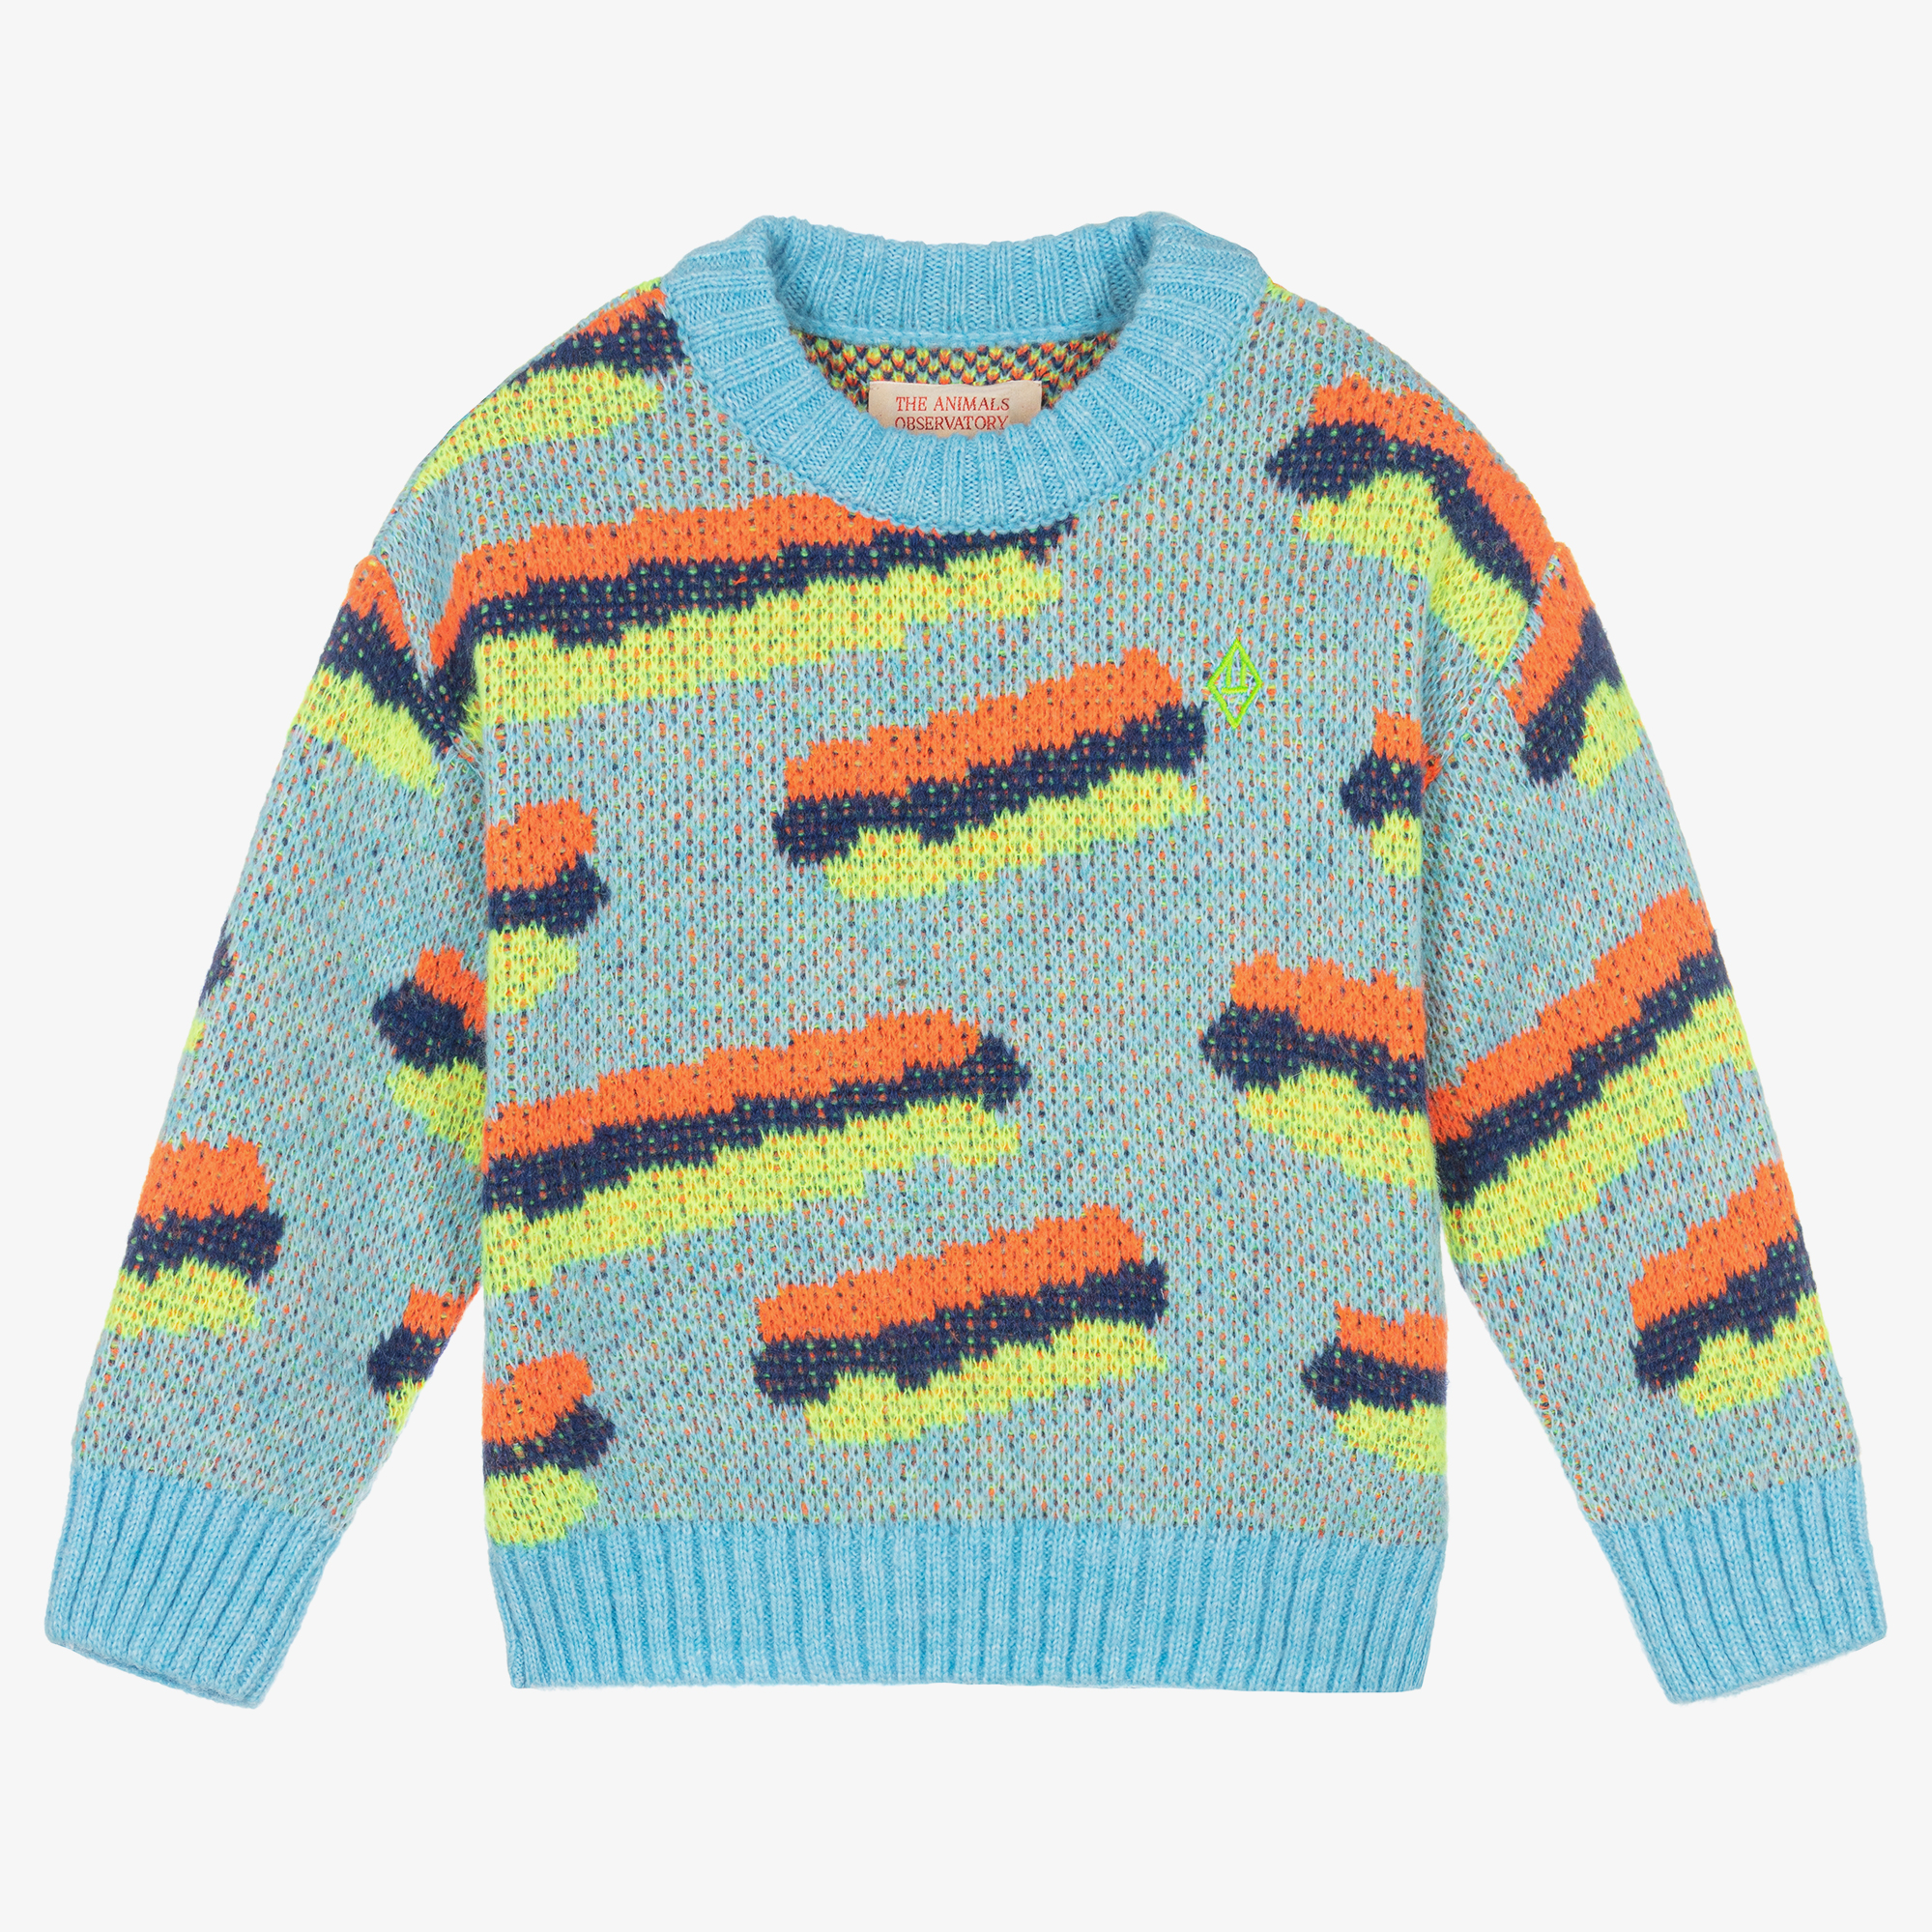 The Animals Observatory Blue & Orange Knitted Sweater